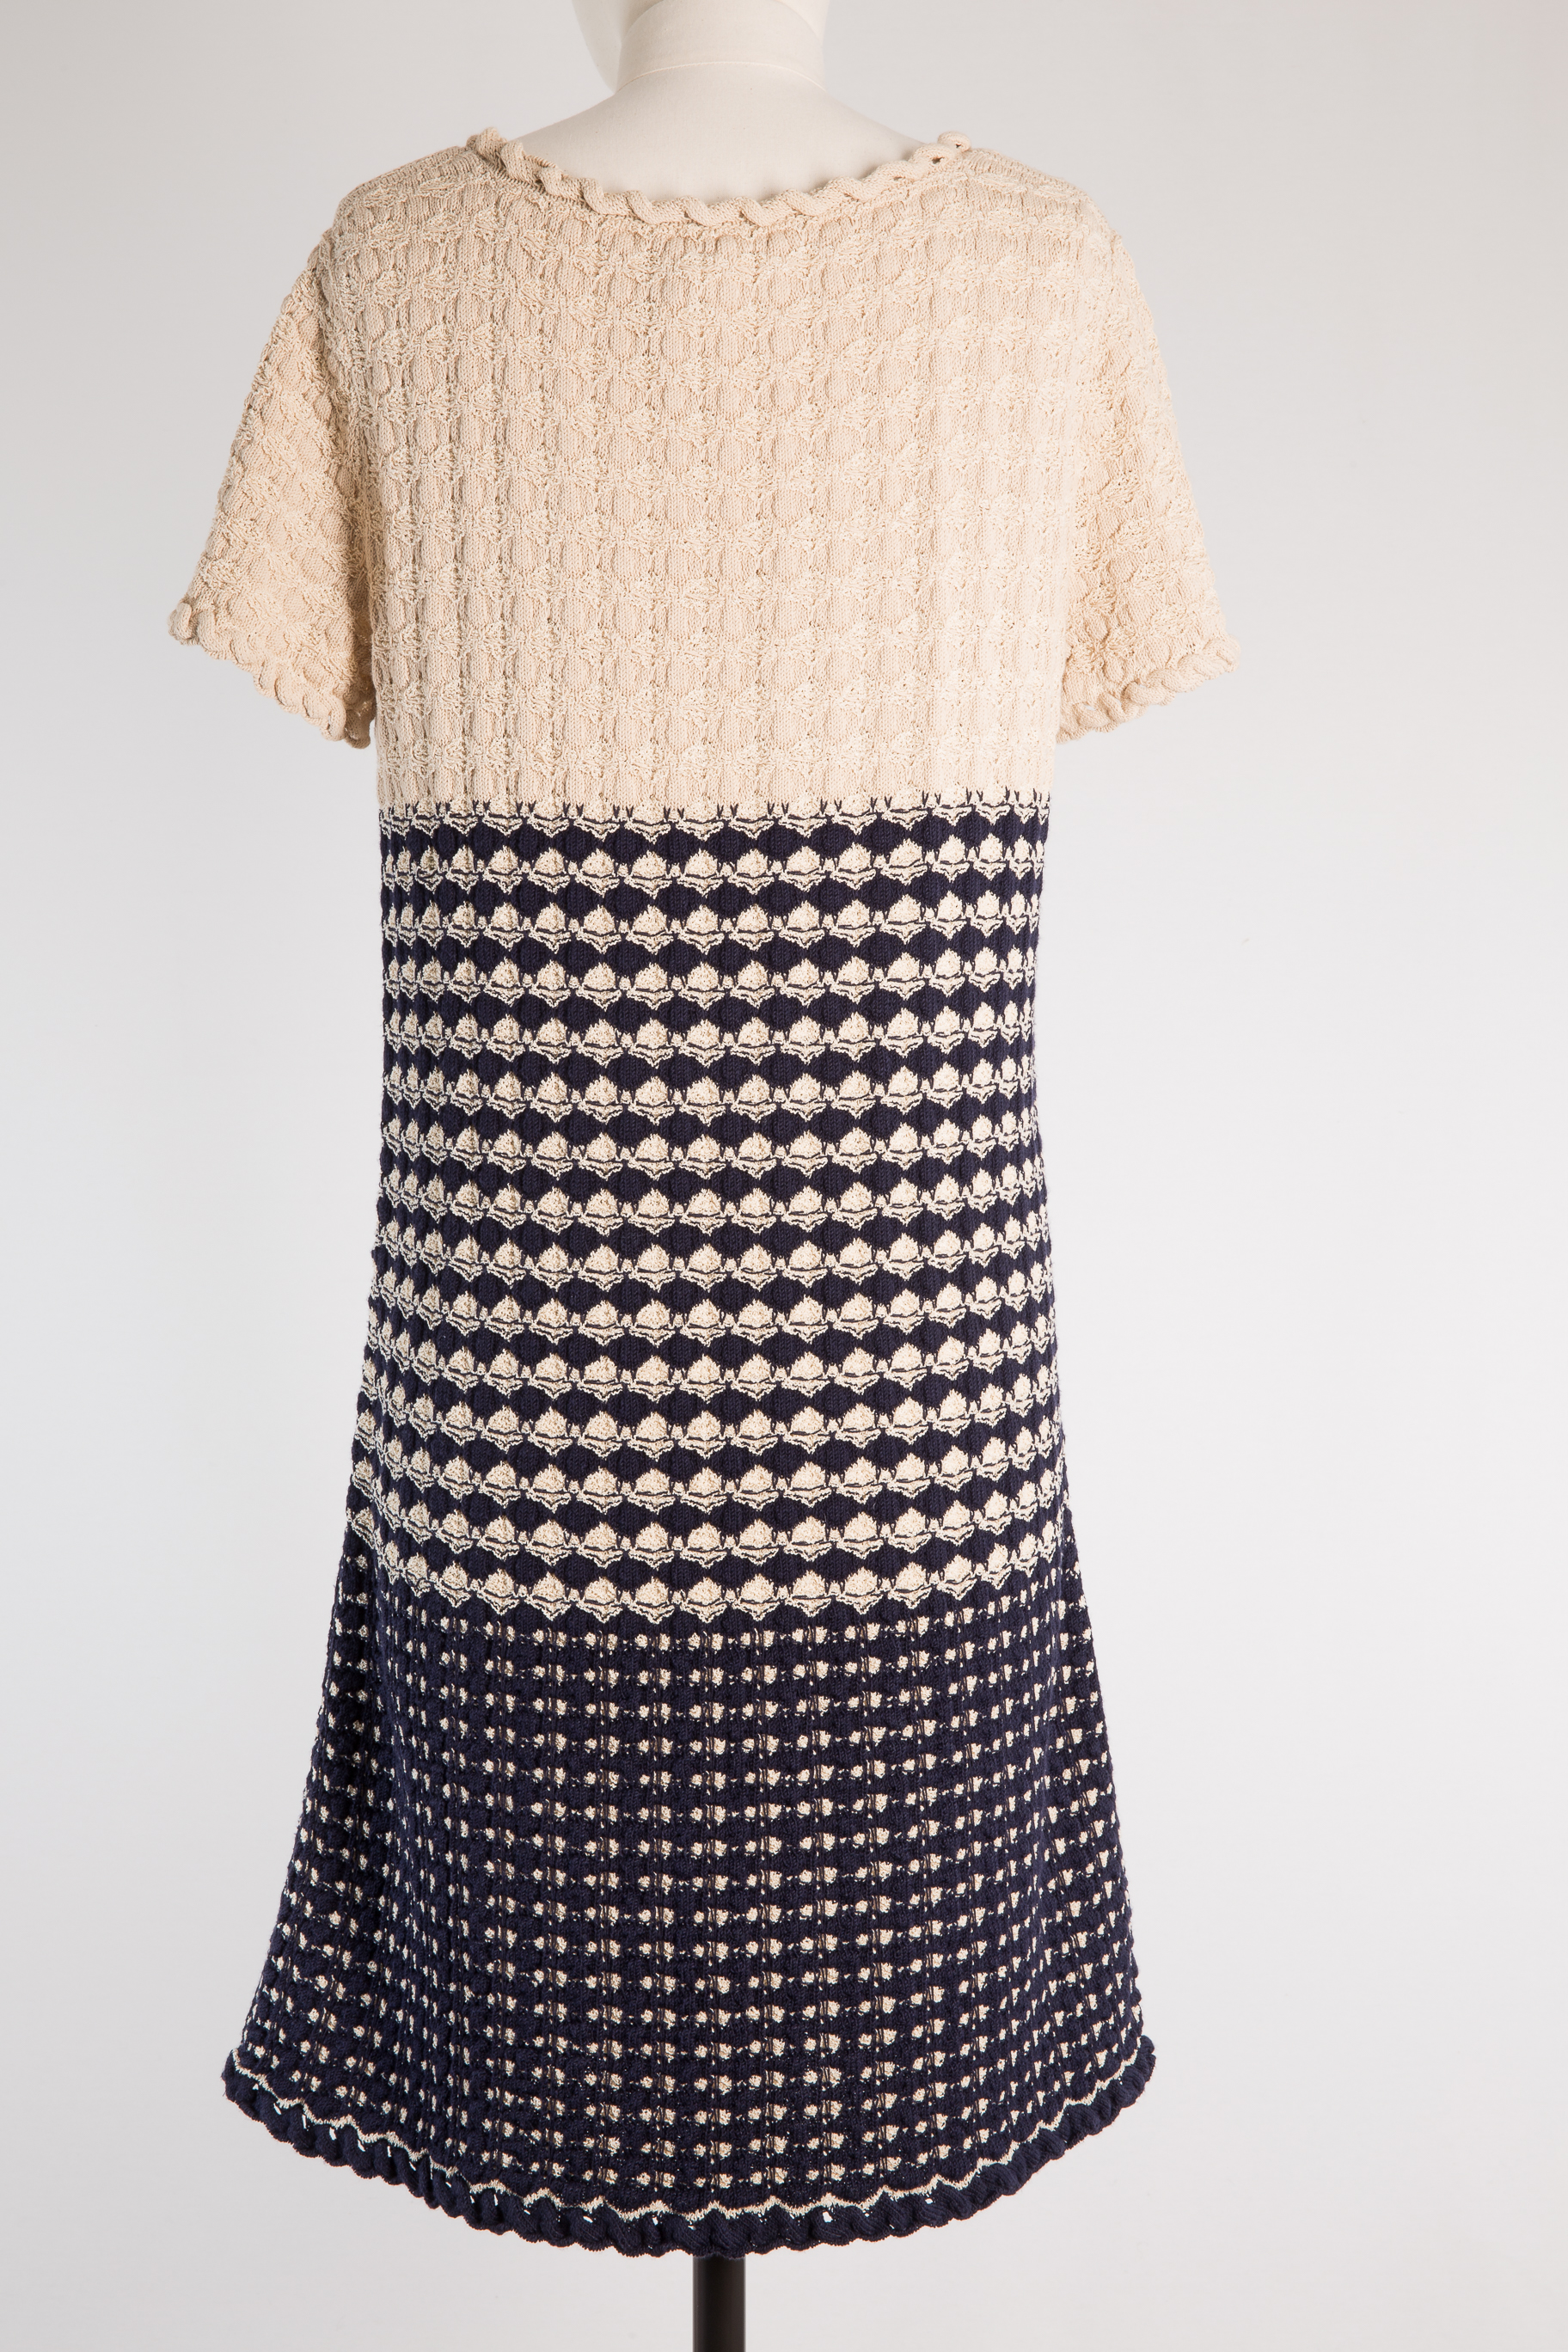 Chanel Knitted Dress, FR40 - Huntessa Luxury Online Consignment Boutique